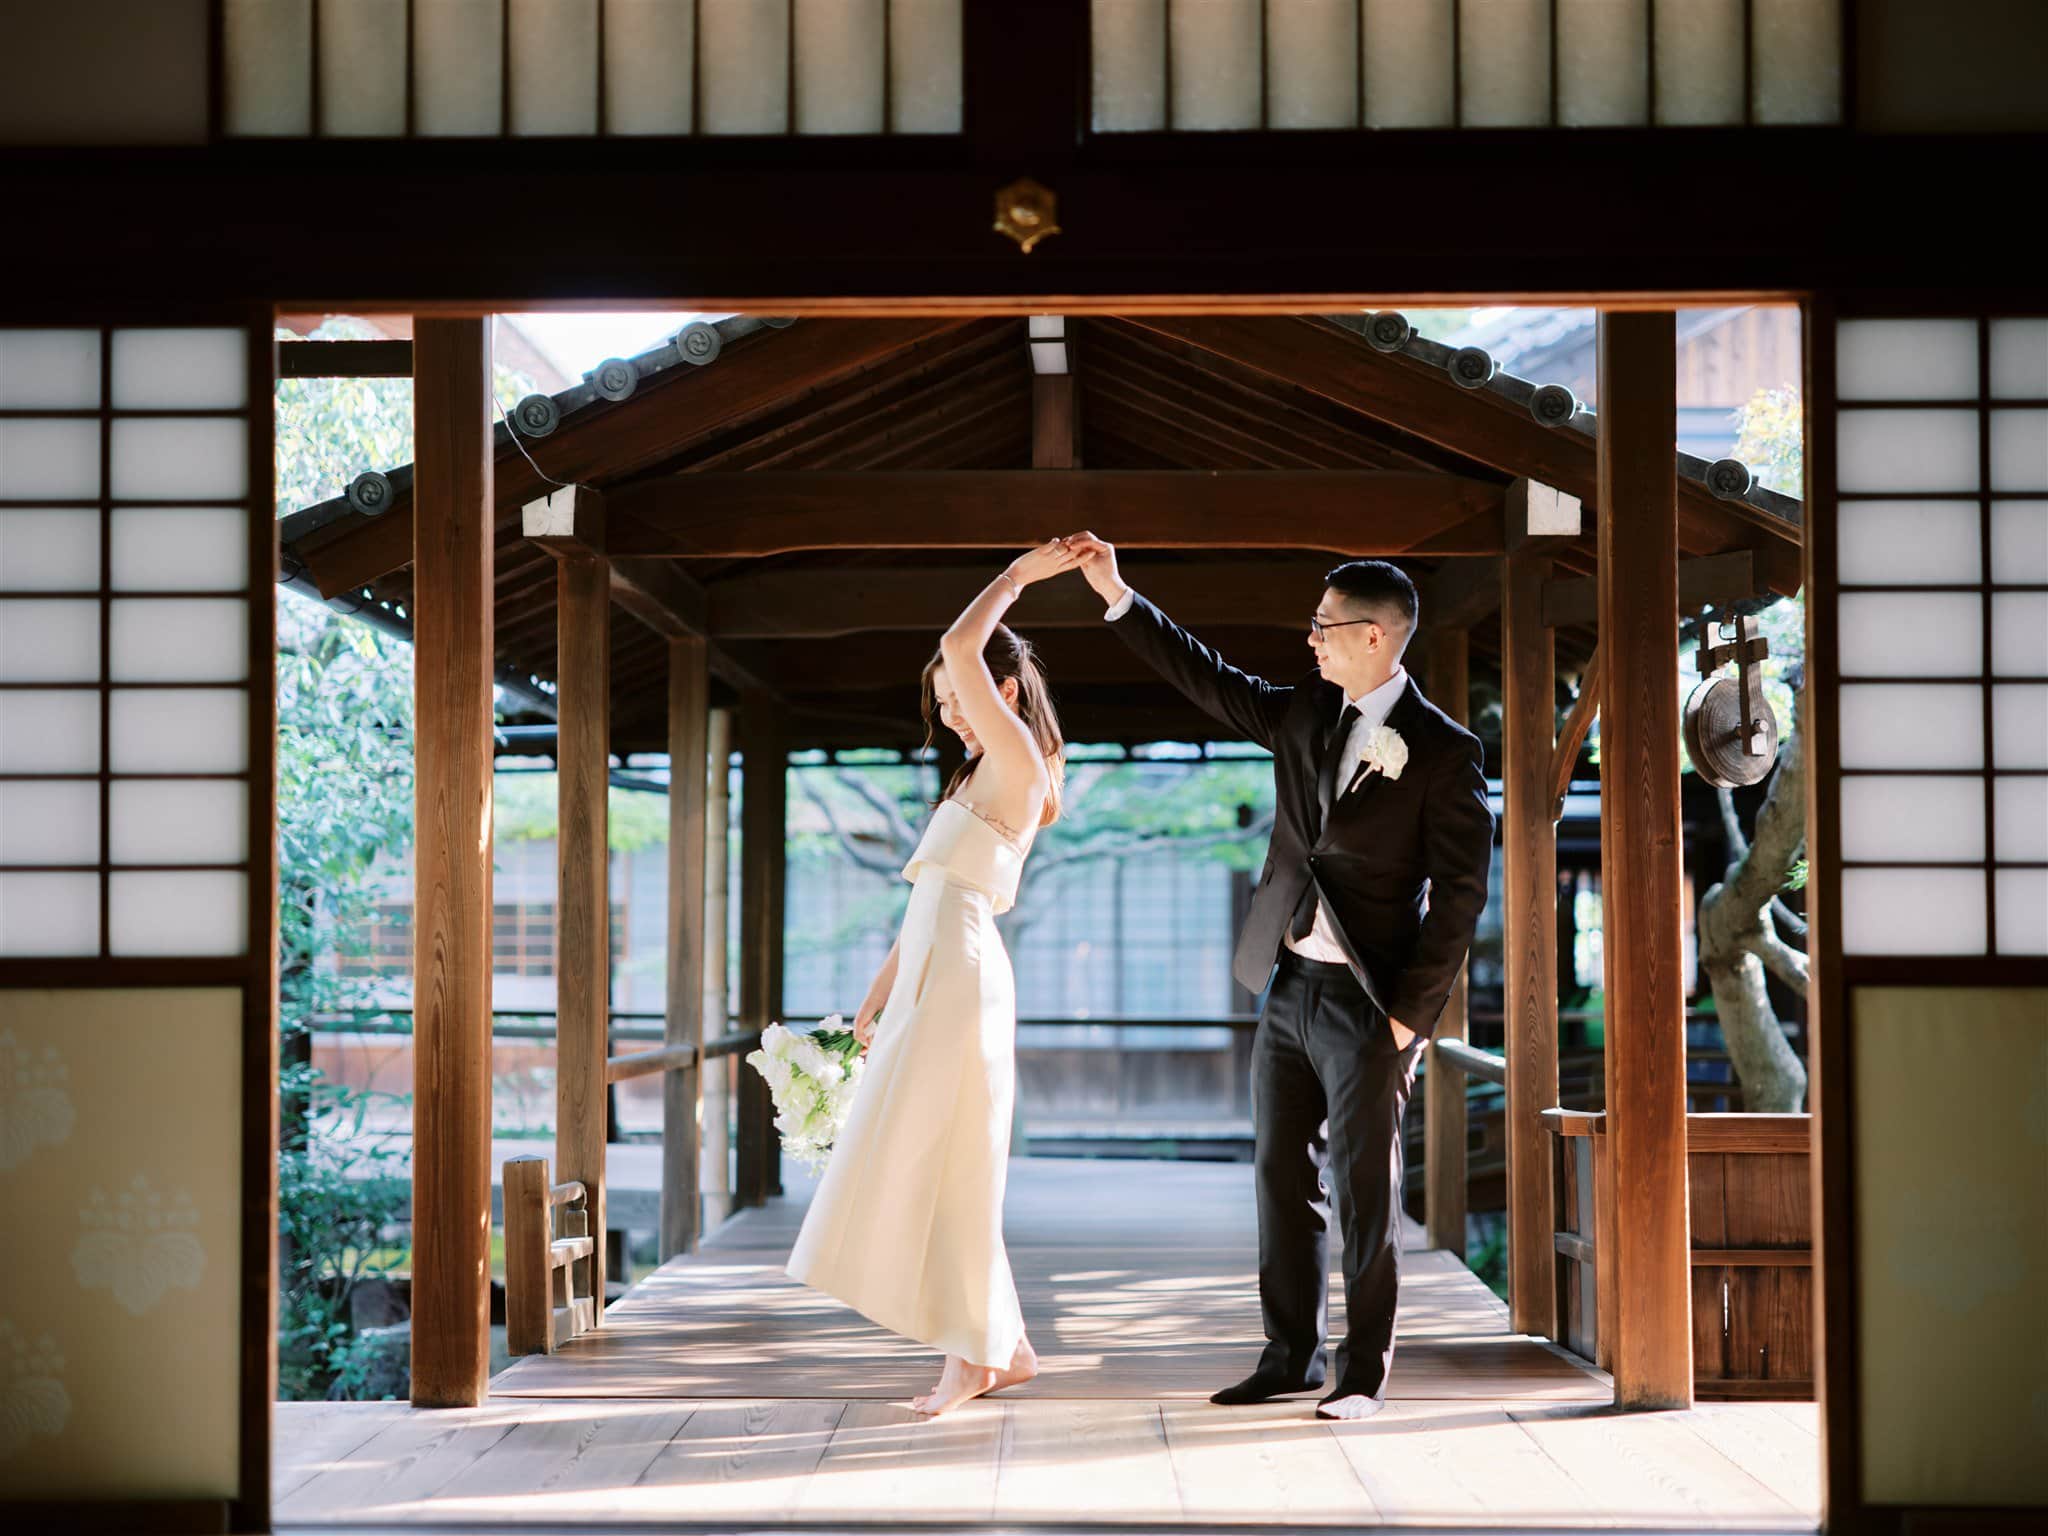 Kyoto Tokyo Japan Elopement Wedding Photographer, Planner & Videographer | A bride and groom elegantly dancing in a traditional Japanese house during their Japan elopement.